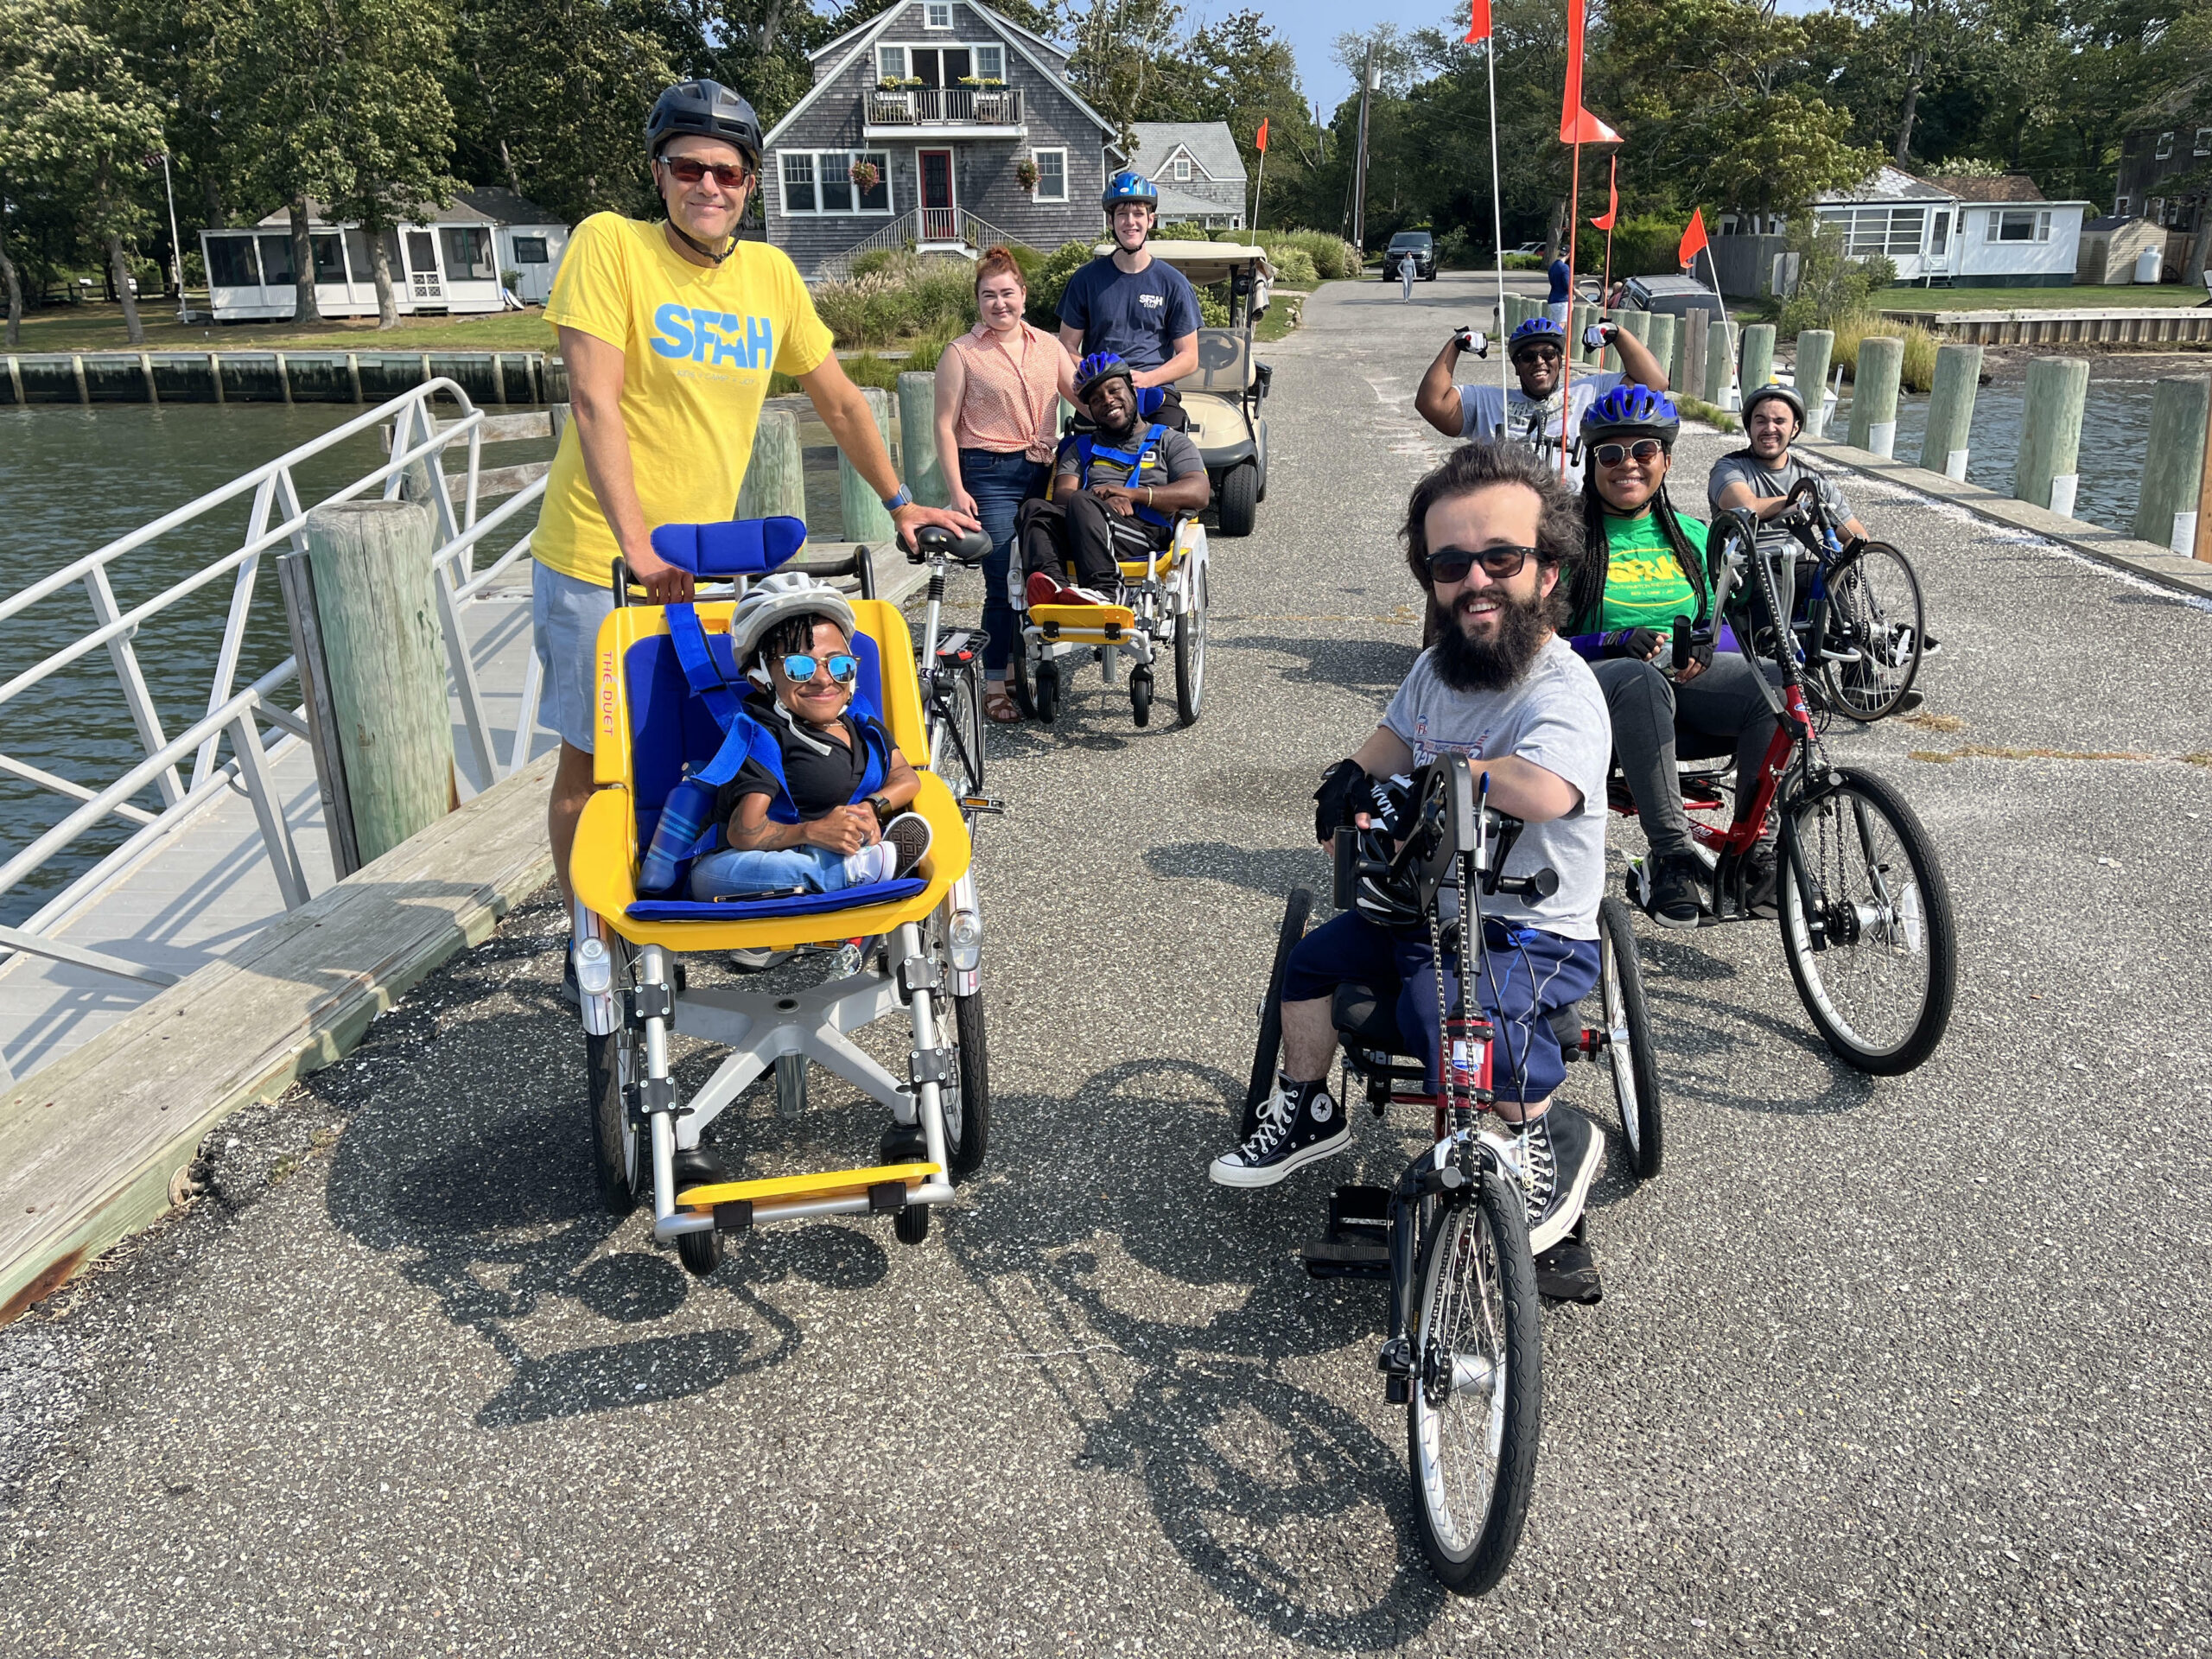 On Sunday, September 18, a group of alumni campers from Southampton Fresh Air Home participated in a 10-mile adapted bike ride in the area surrounding the camp to raise funds for the organization’s year-round programs for children with physical disabilities.  The event raised more than $3,000 with contributions still coming in. From left, front, Southampton Fresh Air Home Executive Director Tom Naro, Kiara Esteves, Brian Faithful and Johileny Meran; back, from left, Hanna and Richard Bedard, Sam Billingham, Andrew Bedard and Kevin Gomes.  DAVID BILLINGHAM/SFAH